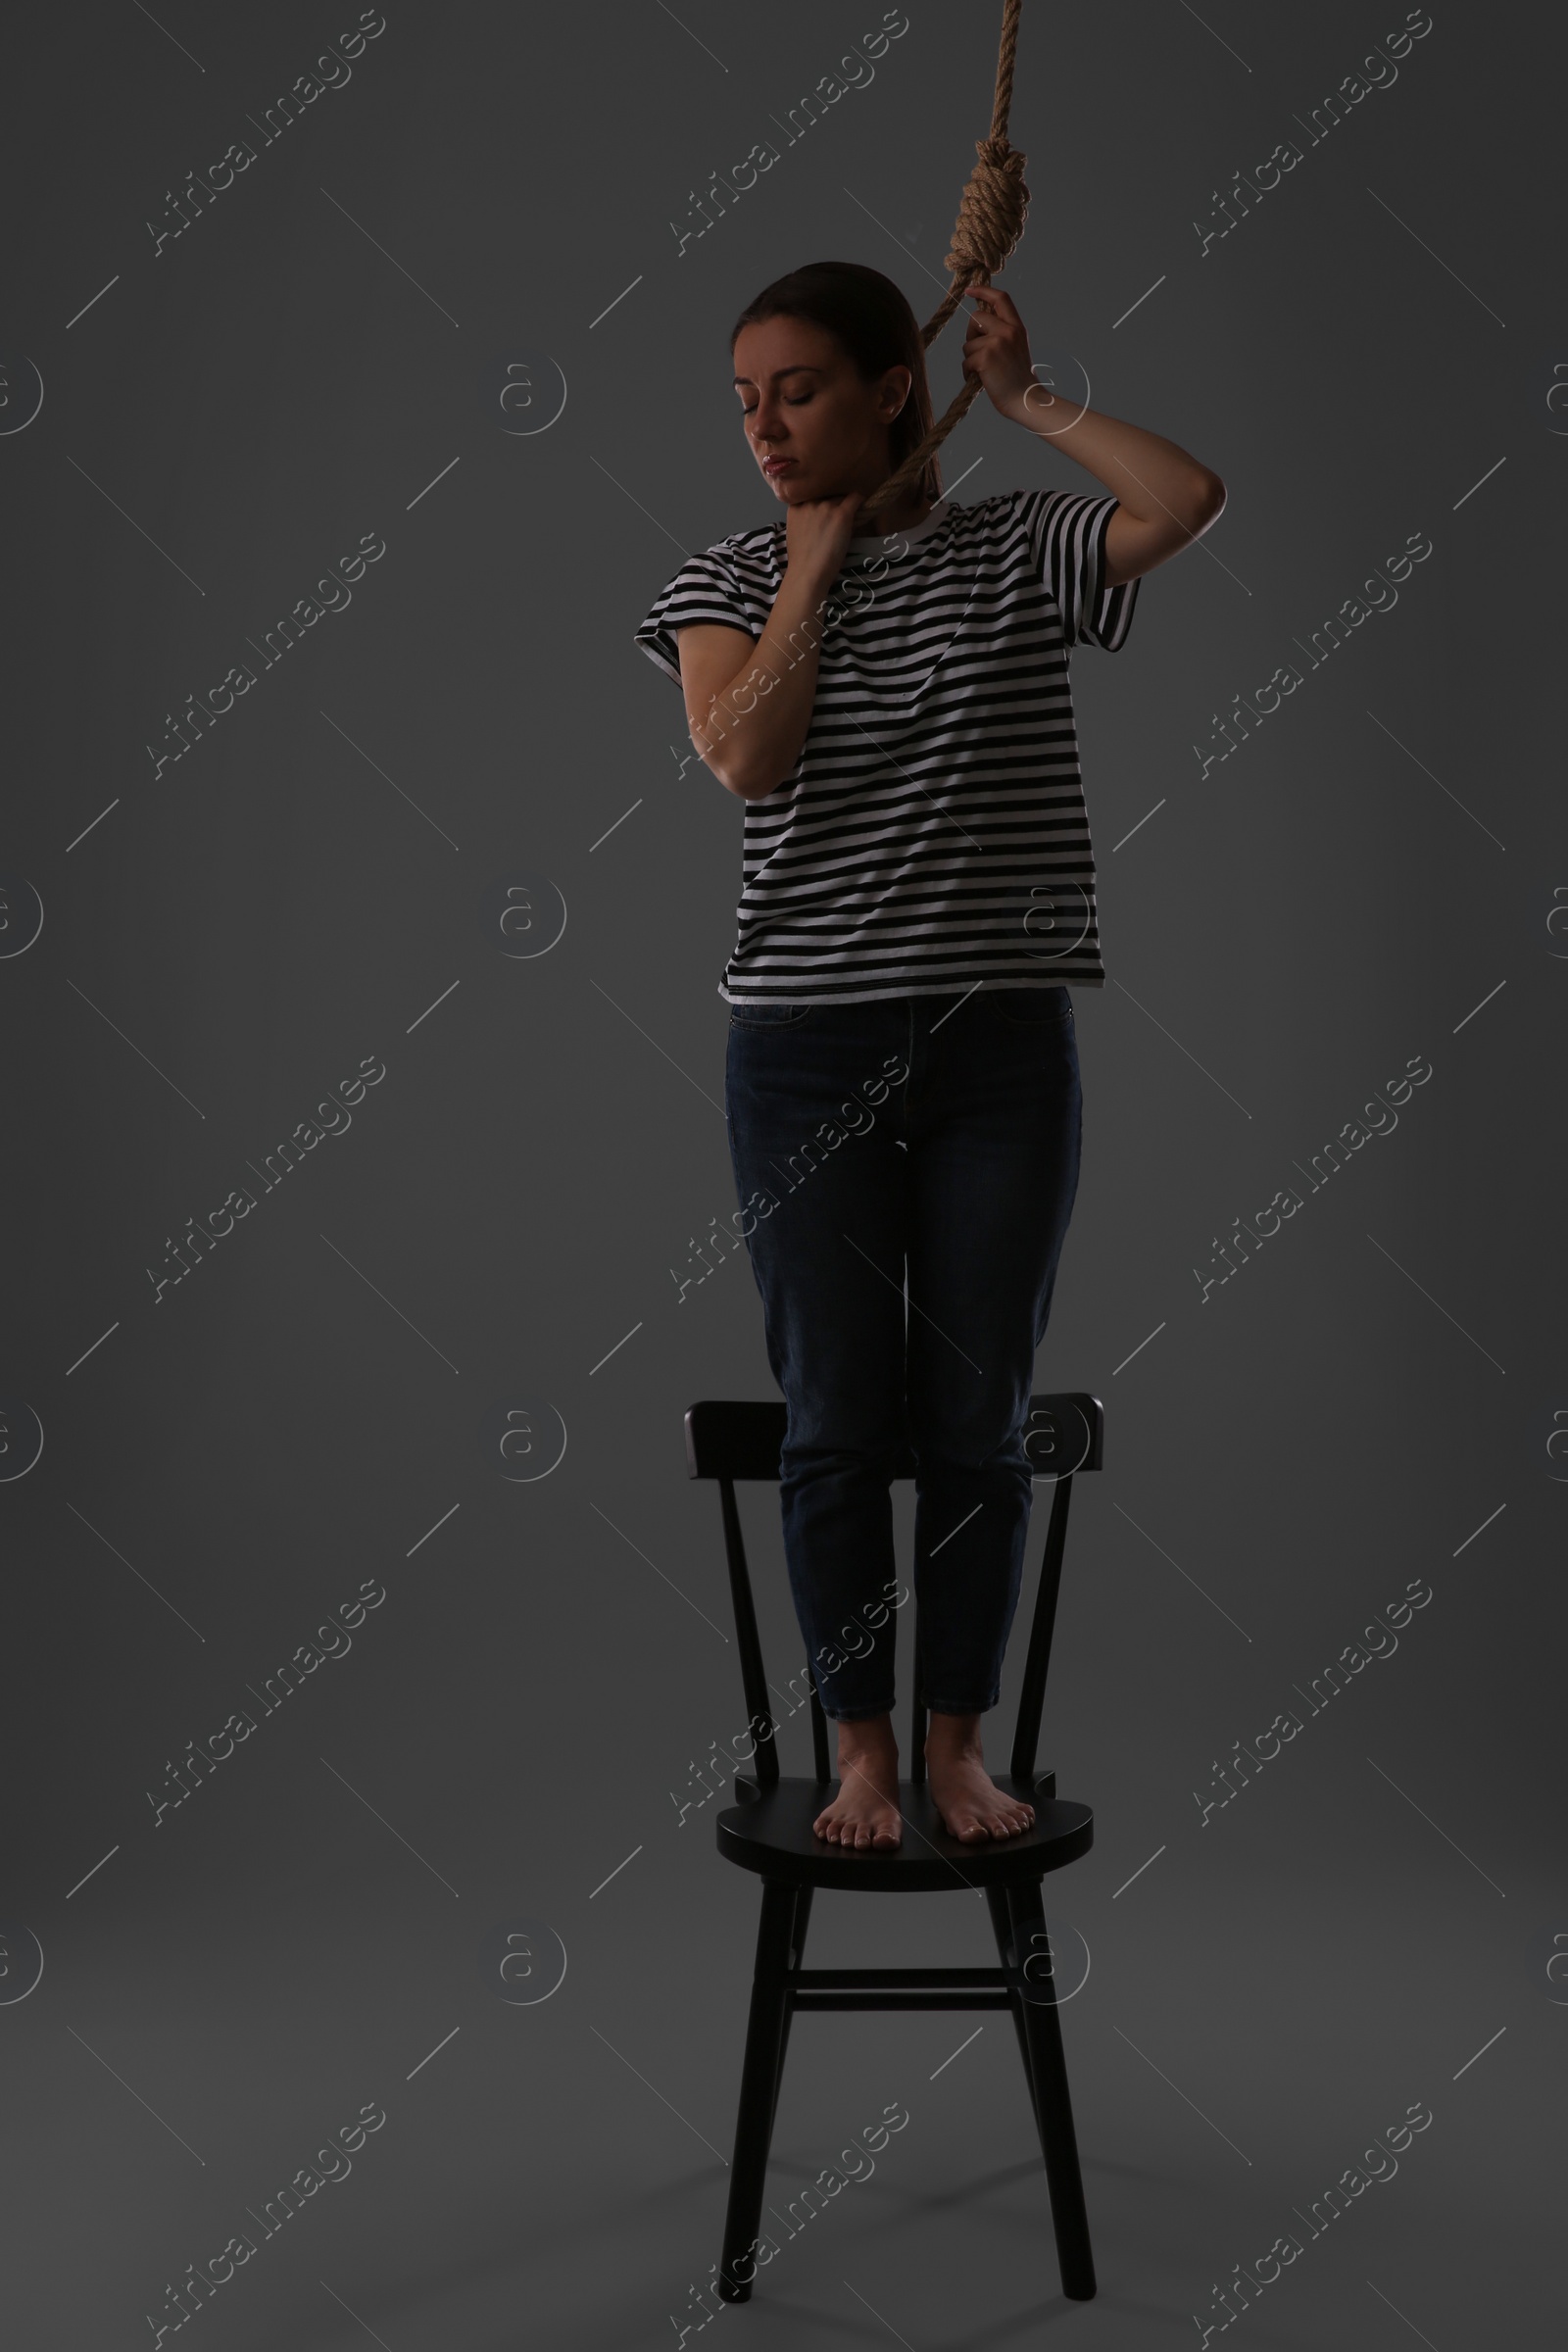 Photo of Depressed woman with rope noose standing on chair against grey background